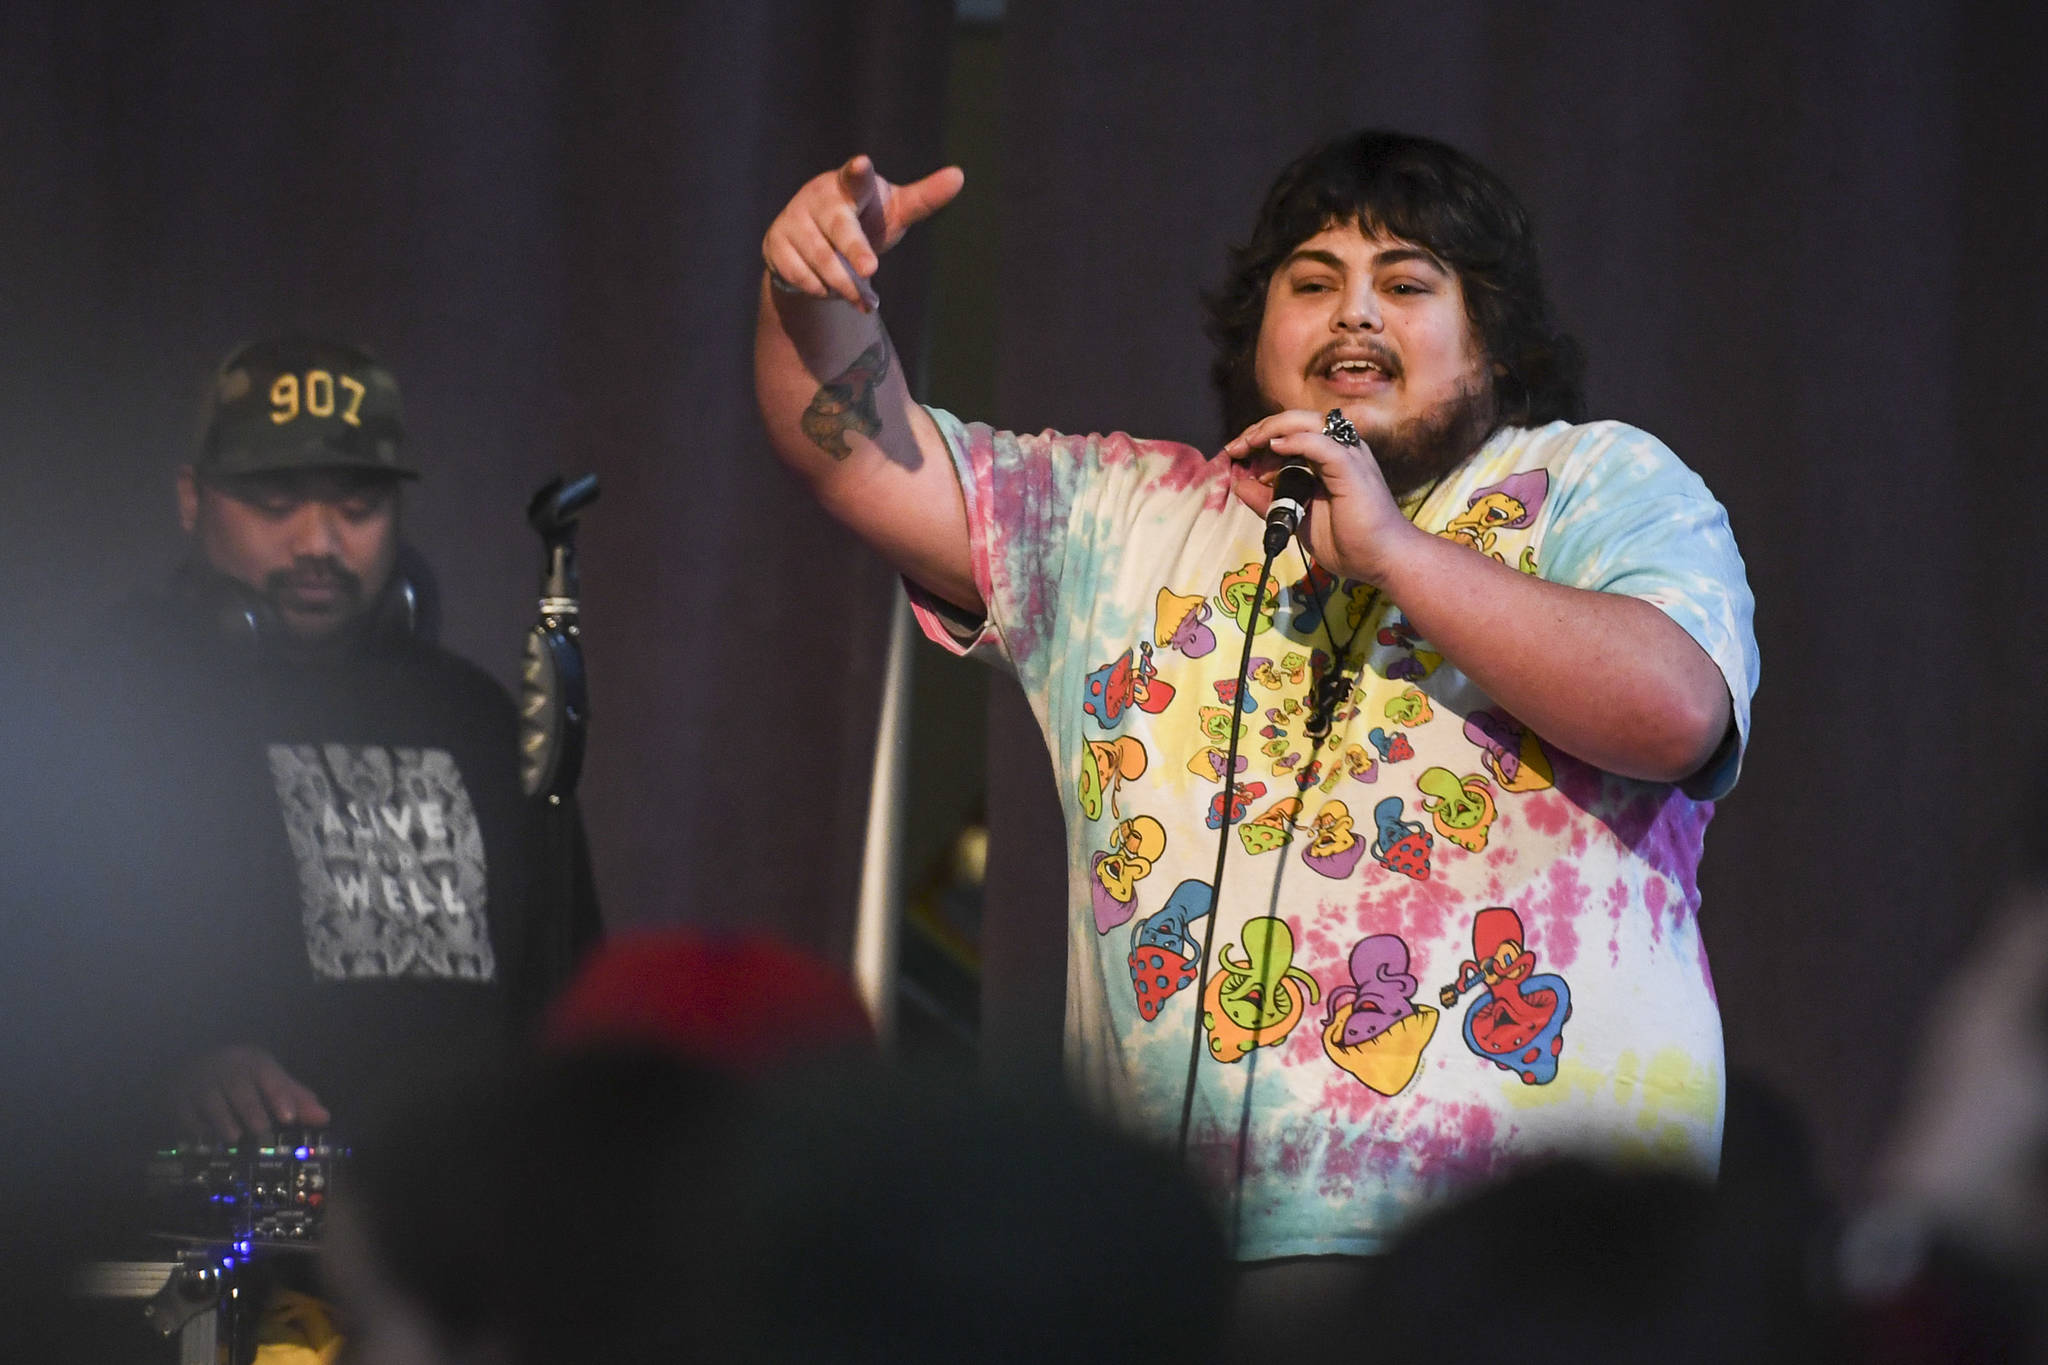 Elephant Boy, also known as Jeremy Abeyta, performs during the Killah Priest of Wu Tang Southeast Tour at the Juneau Arts & Culture Center on Friday, Dec. 20, 2019. (Michael Penn | Juneau Empire)